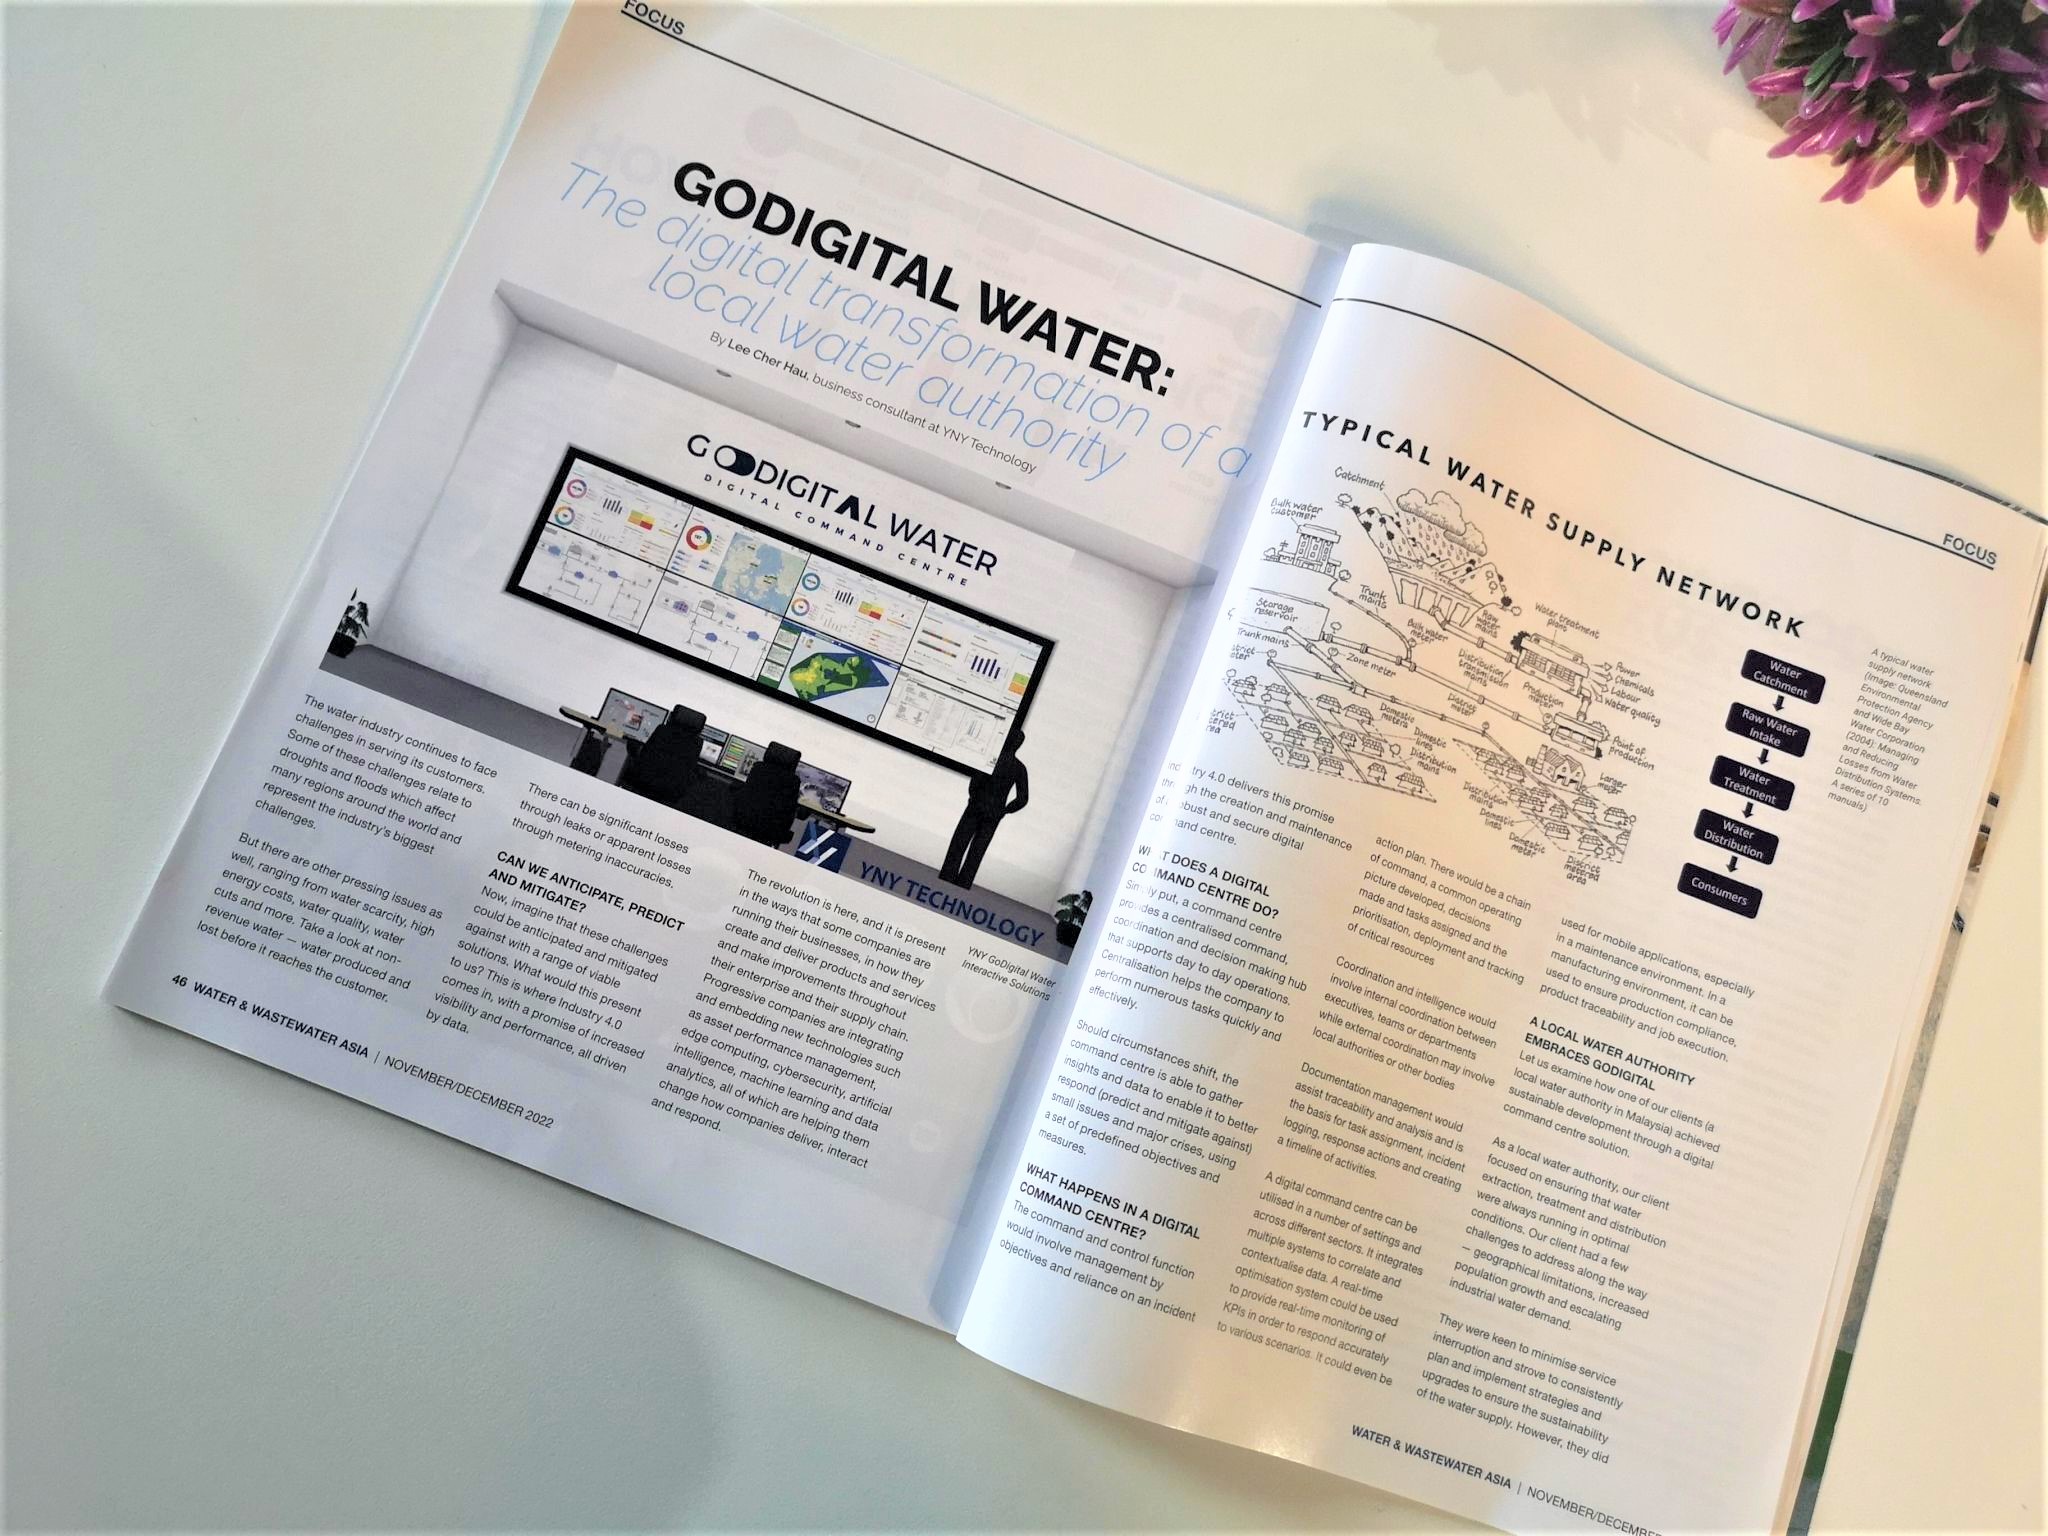 GODIGITAL Water: The Digital Transformation of a Local Water Authority